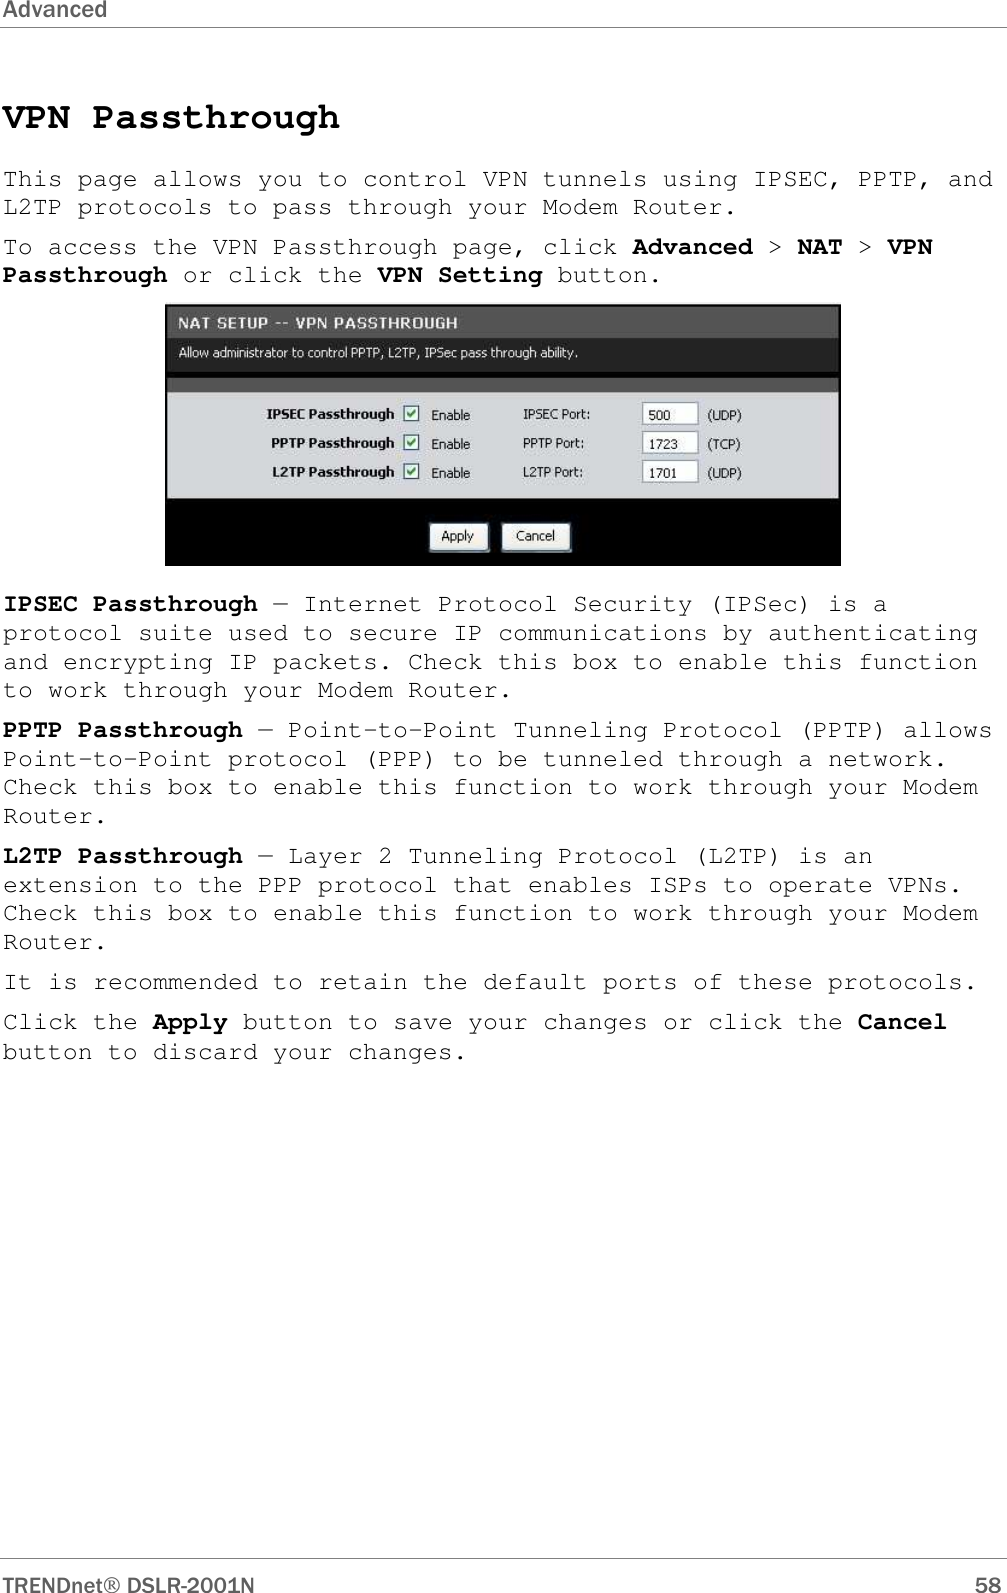 Advanced      TRENDnet DSLR-2001N        58 VPN Passthrough This page allows you to control VPN tunnels using IPSEC, PPTP, and L2TP protocols to pass through your Modem Router. To access the VPN Passthrough page, click Advanced &gt; NAT &gt; VPN Passthrough or click the VPN Setting button.  IPSEC Passthrough — Internet Protocol Security (IPSec) is a protocol suite used to secure IP communications by authenticating and encrypting IP packets. Check this box to enable this function to work through your Modem Router. PPTP Passthrough — Point-to-Point Tunneling Protocol (PPTP) allows Point-to-Point protocol (PPP) to be tunneled through a network. Check this box to enable this function to work through your Modem Router. L2TP Passthrough — Layer 2 Tunneling Protocol (L2TP) is an extension to the PPP protocol that enables ISPs to operate VPNs. Check this box to enable this function to work through your Modem Router. It is recommended to retain the default ports of these protocols. Click the Apply button to save your changes or click the Cancel button to discard your changes. 